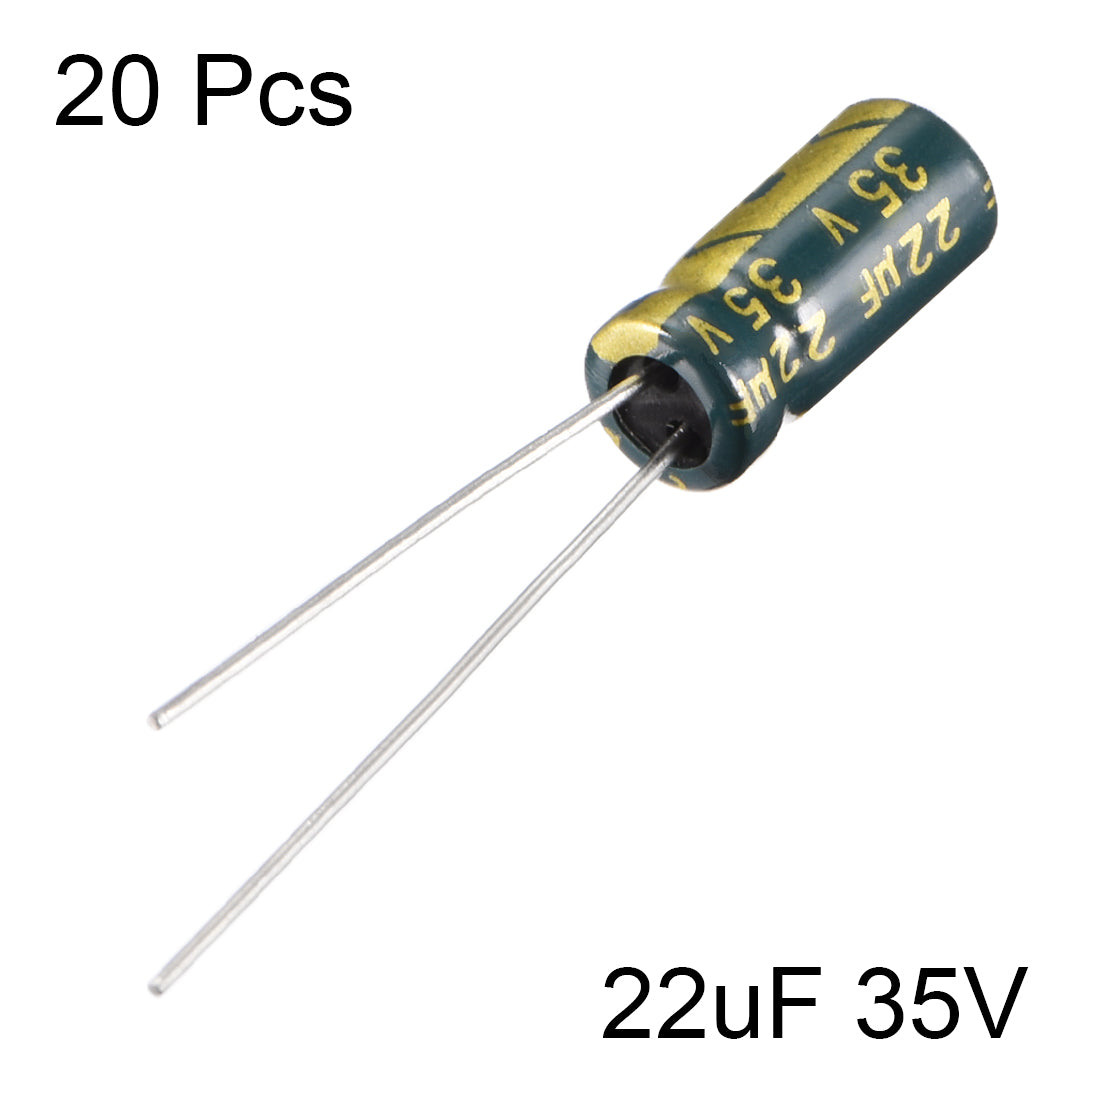 uxcell Uxcell Aluminum Radial Electrolytic Capacitor Low ESR Green with 22uF 35V 105 Celsius Life 3000H 5 x 11 mm High Ripple Current,Low Impedance 20pcs